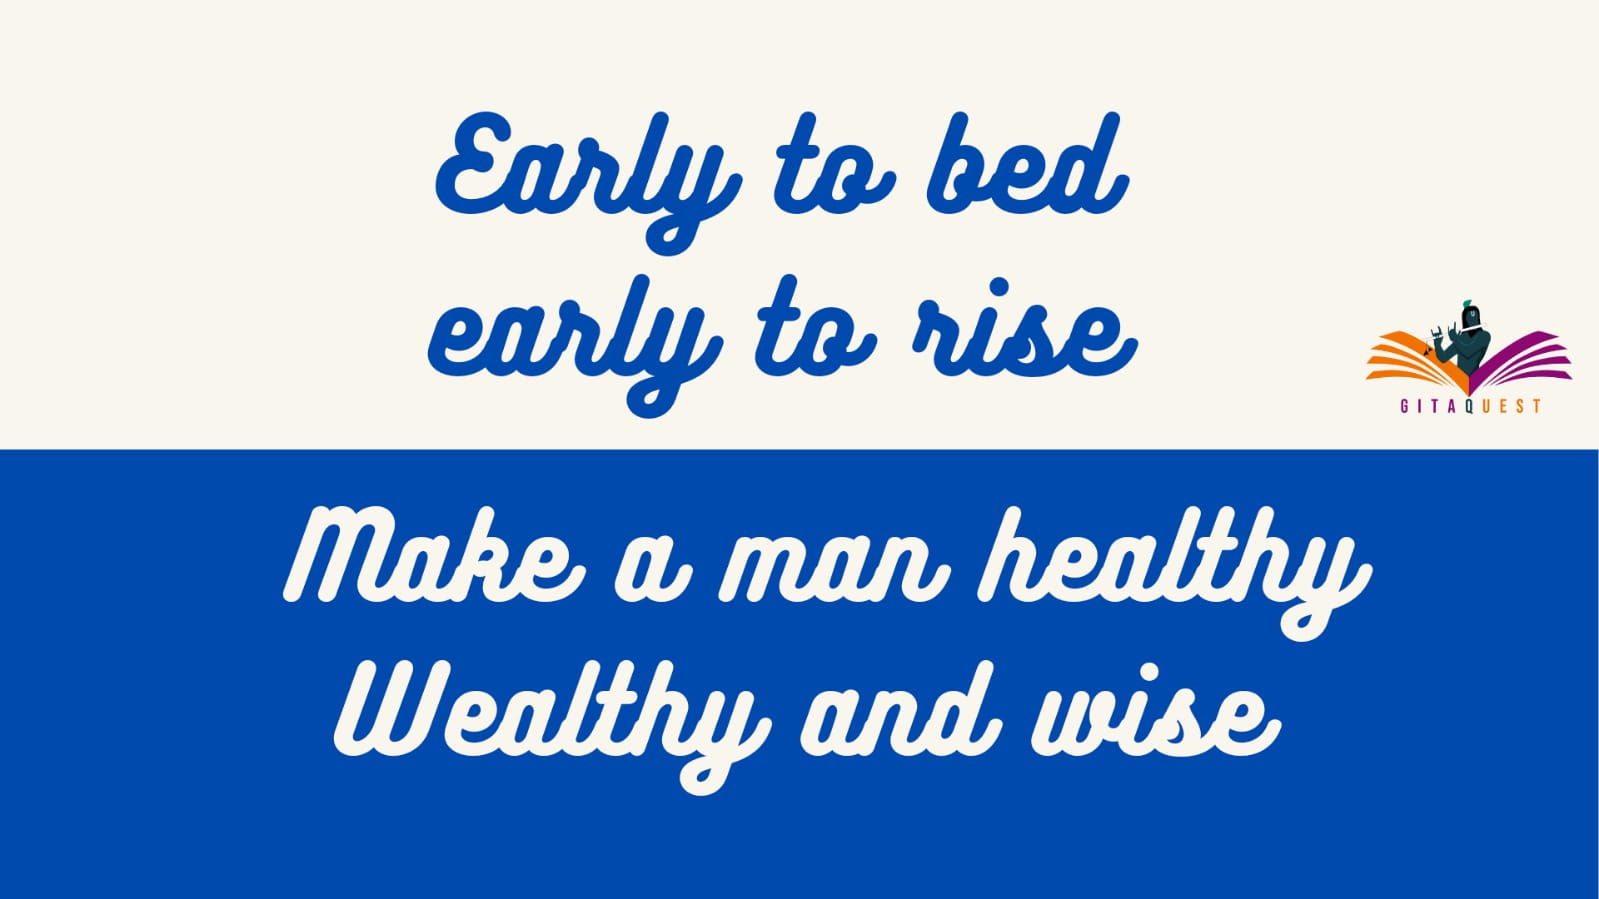 https://gitaquest.in/wp-content/uploads/2023/04/early-to-bed-early-to-rise-make-man-healthy-and-wise.jpeg